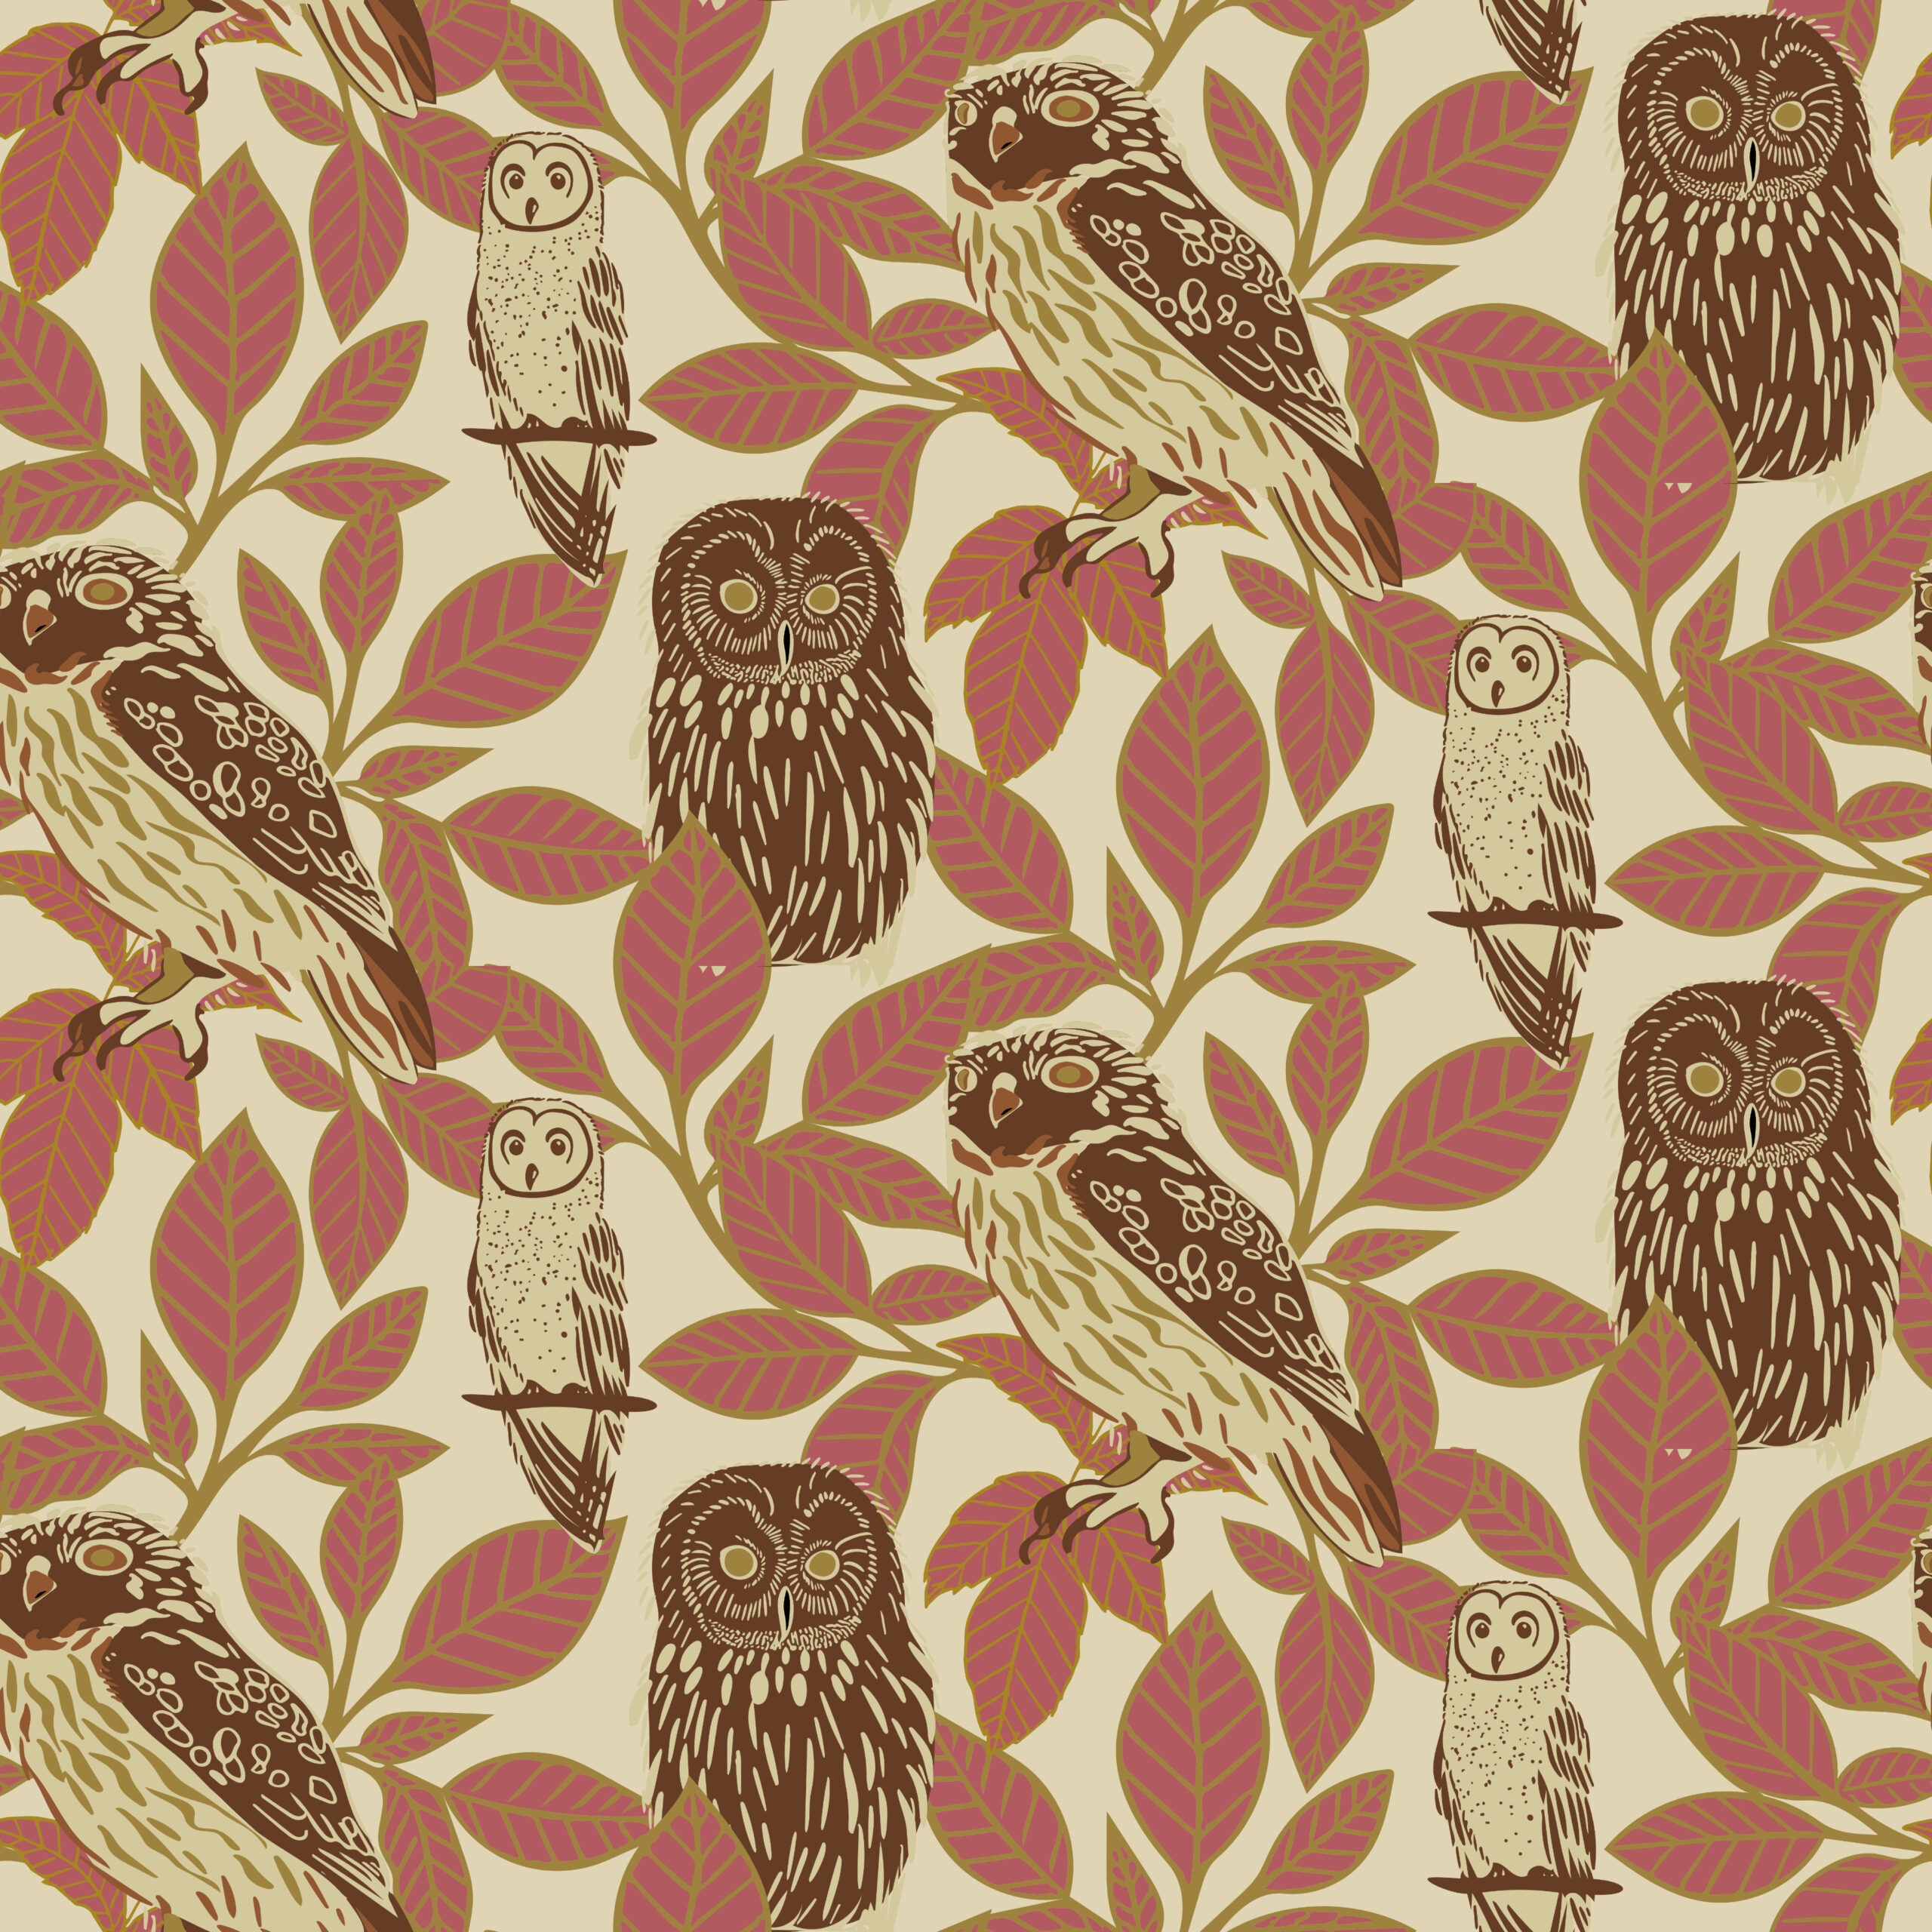 Treetop owls in branches with red leaves.